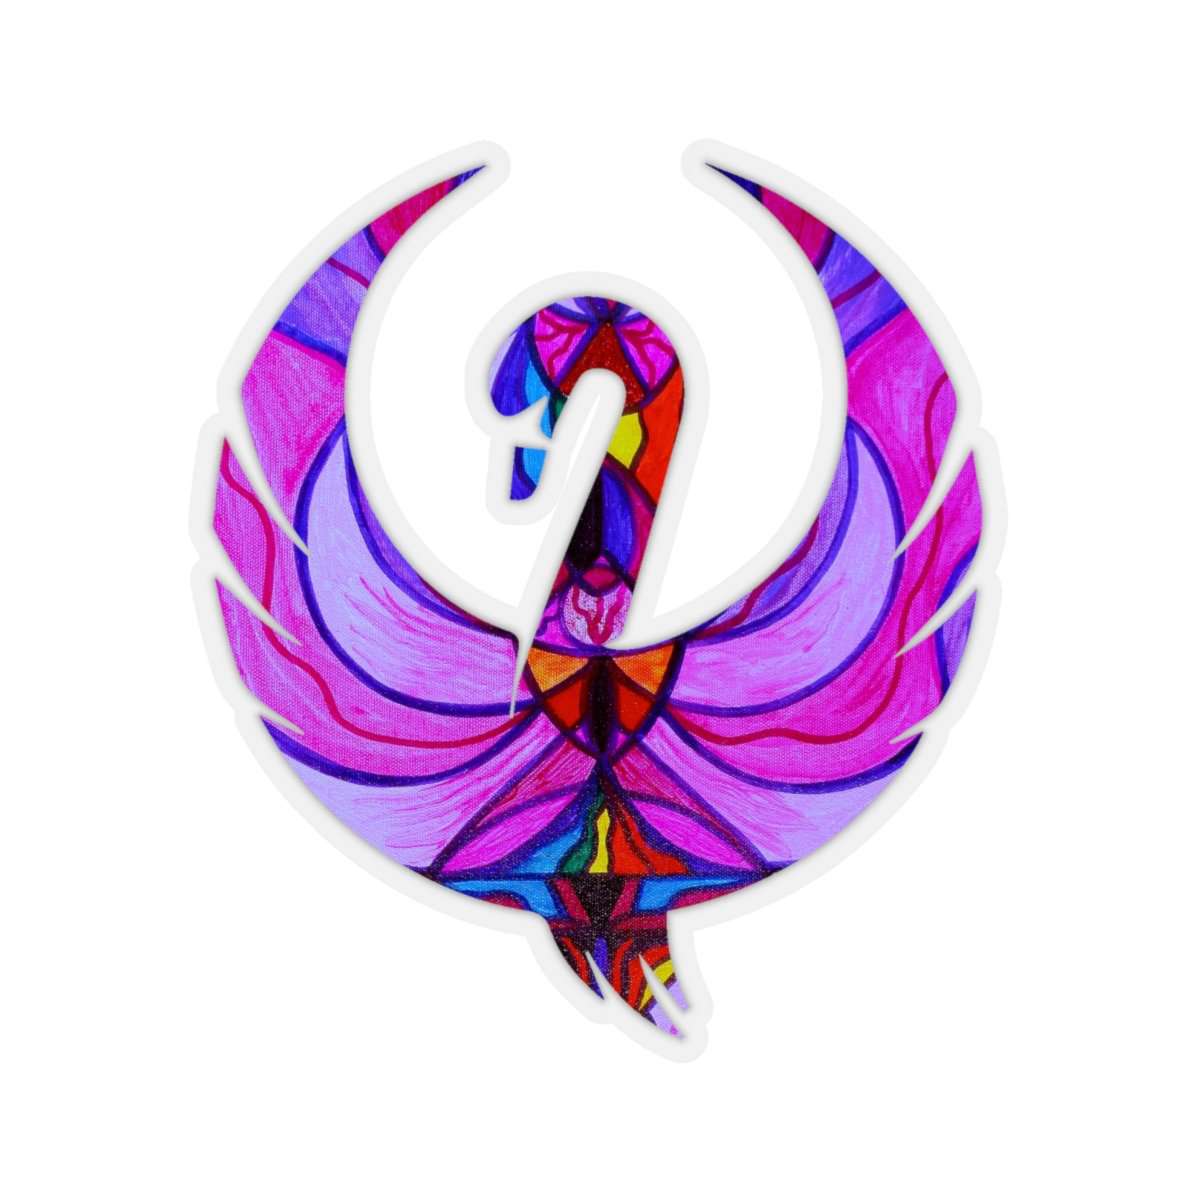 make-your-dreams-come-true-to-wear-divine-feminine-activation-swan-stickers-supply_4.jpg